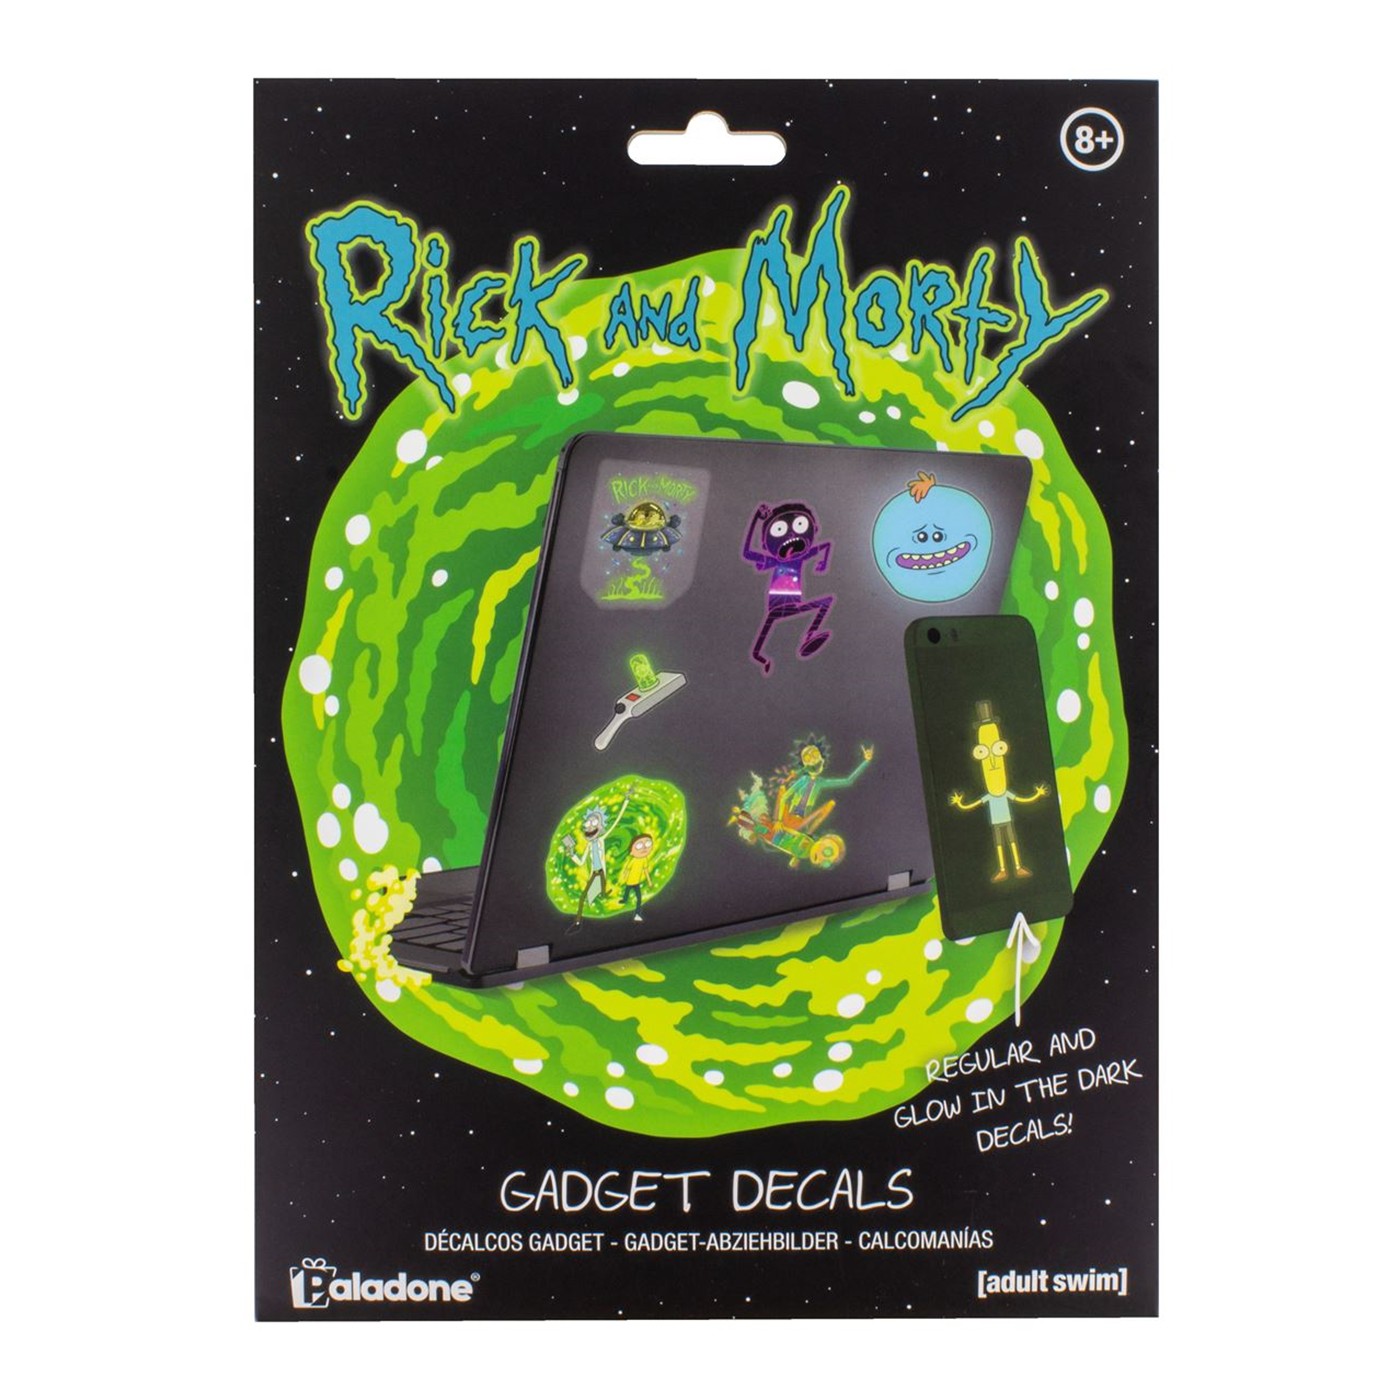 Rick and Morty Gadget Decals